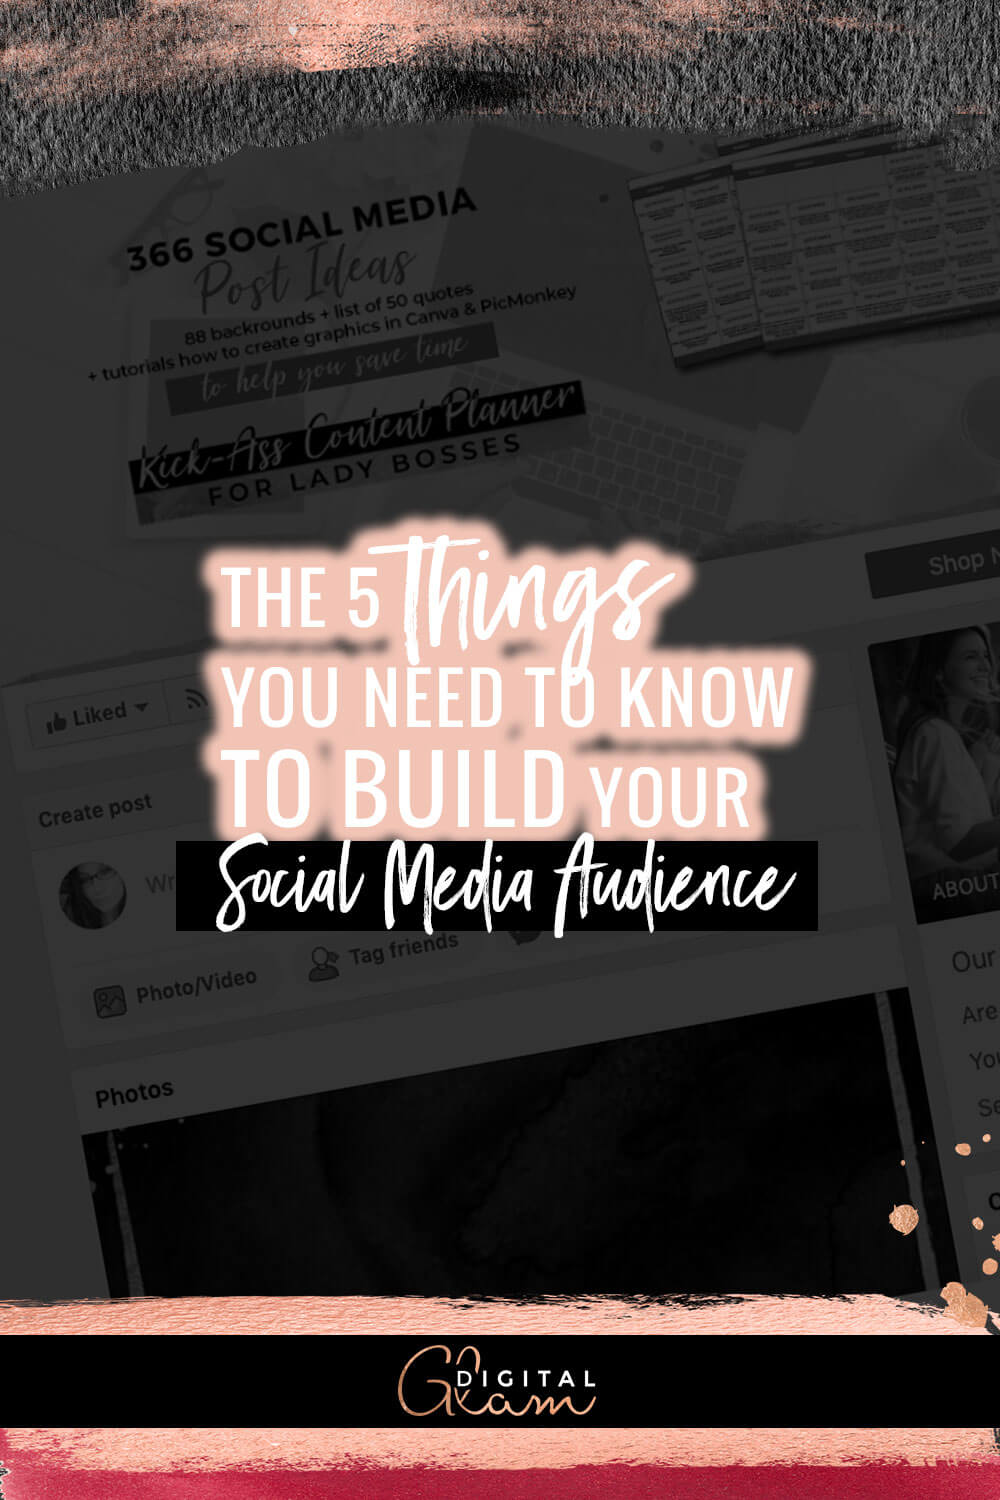 The 5 Things You Need to Know to Build Your Social Media Audience